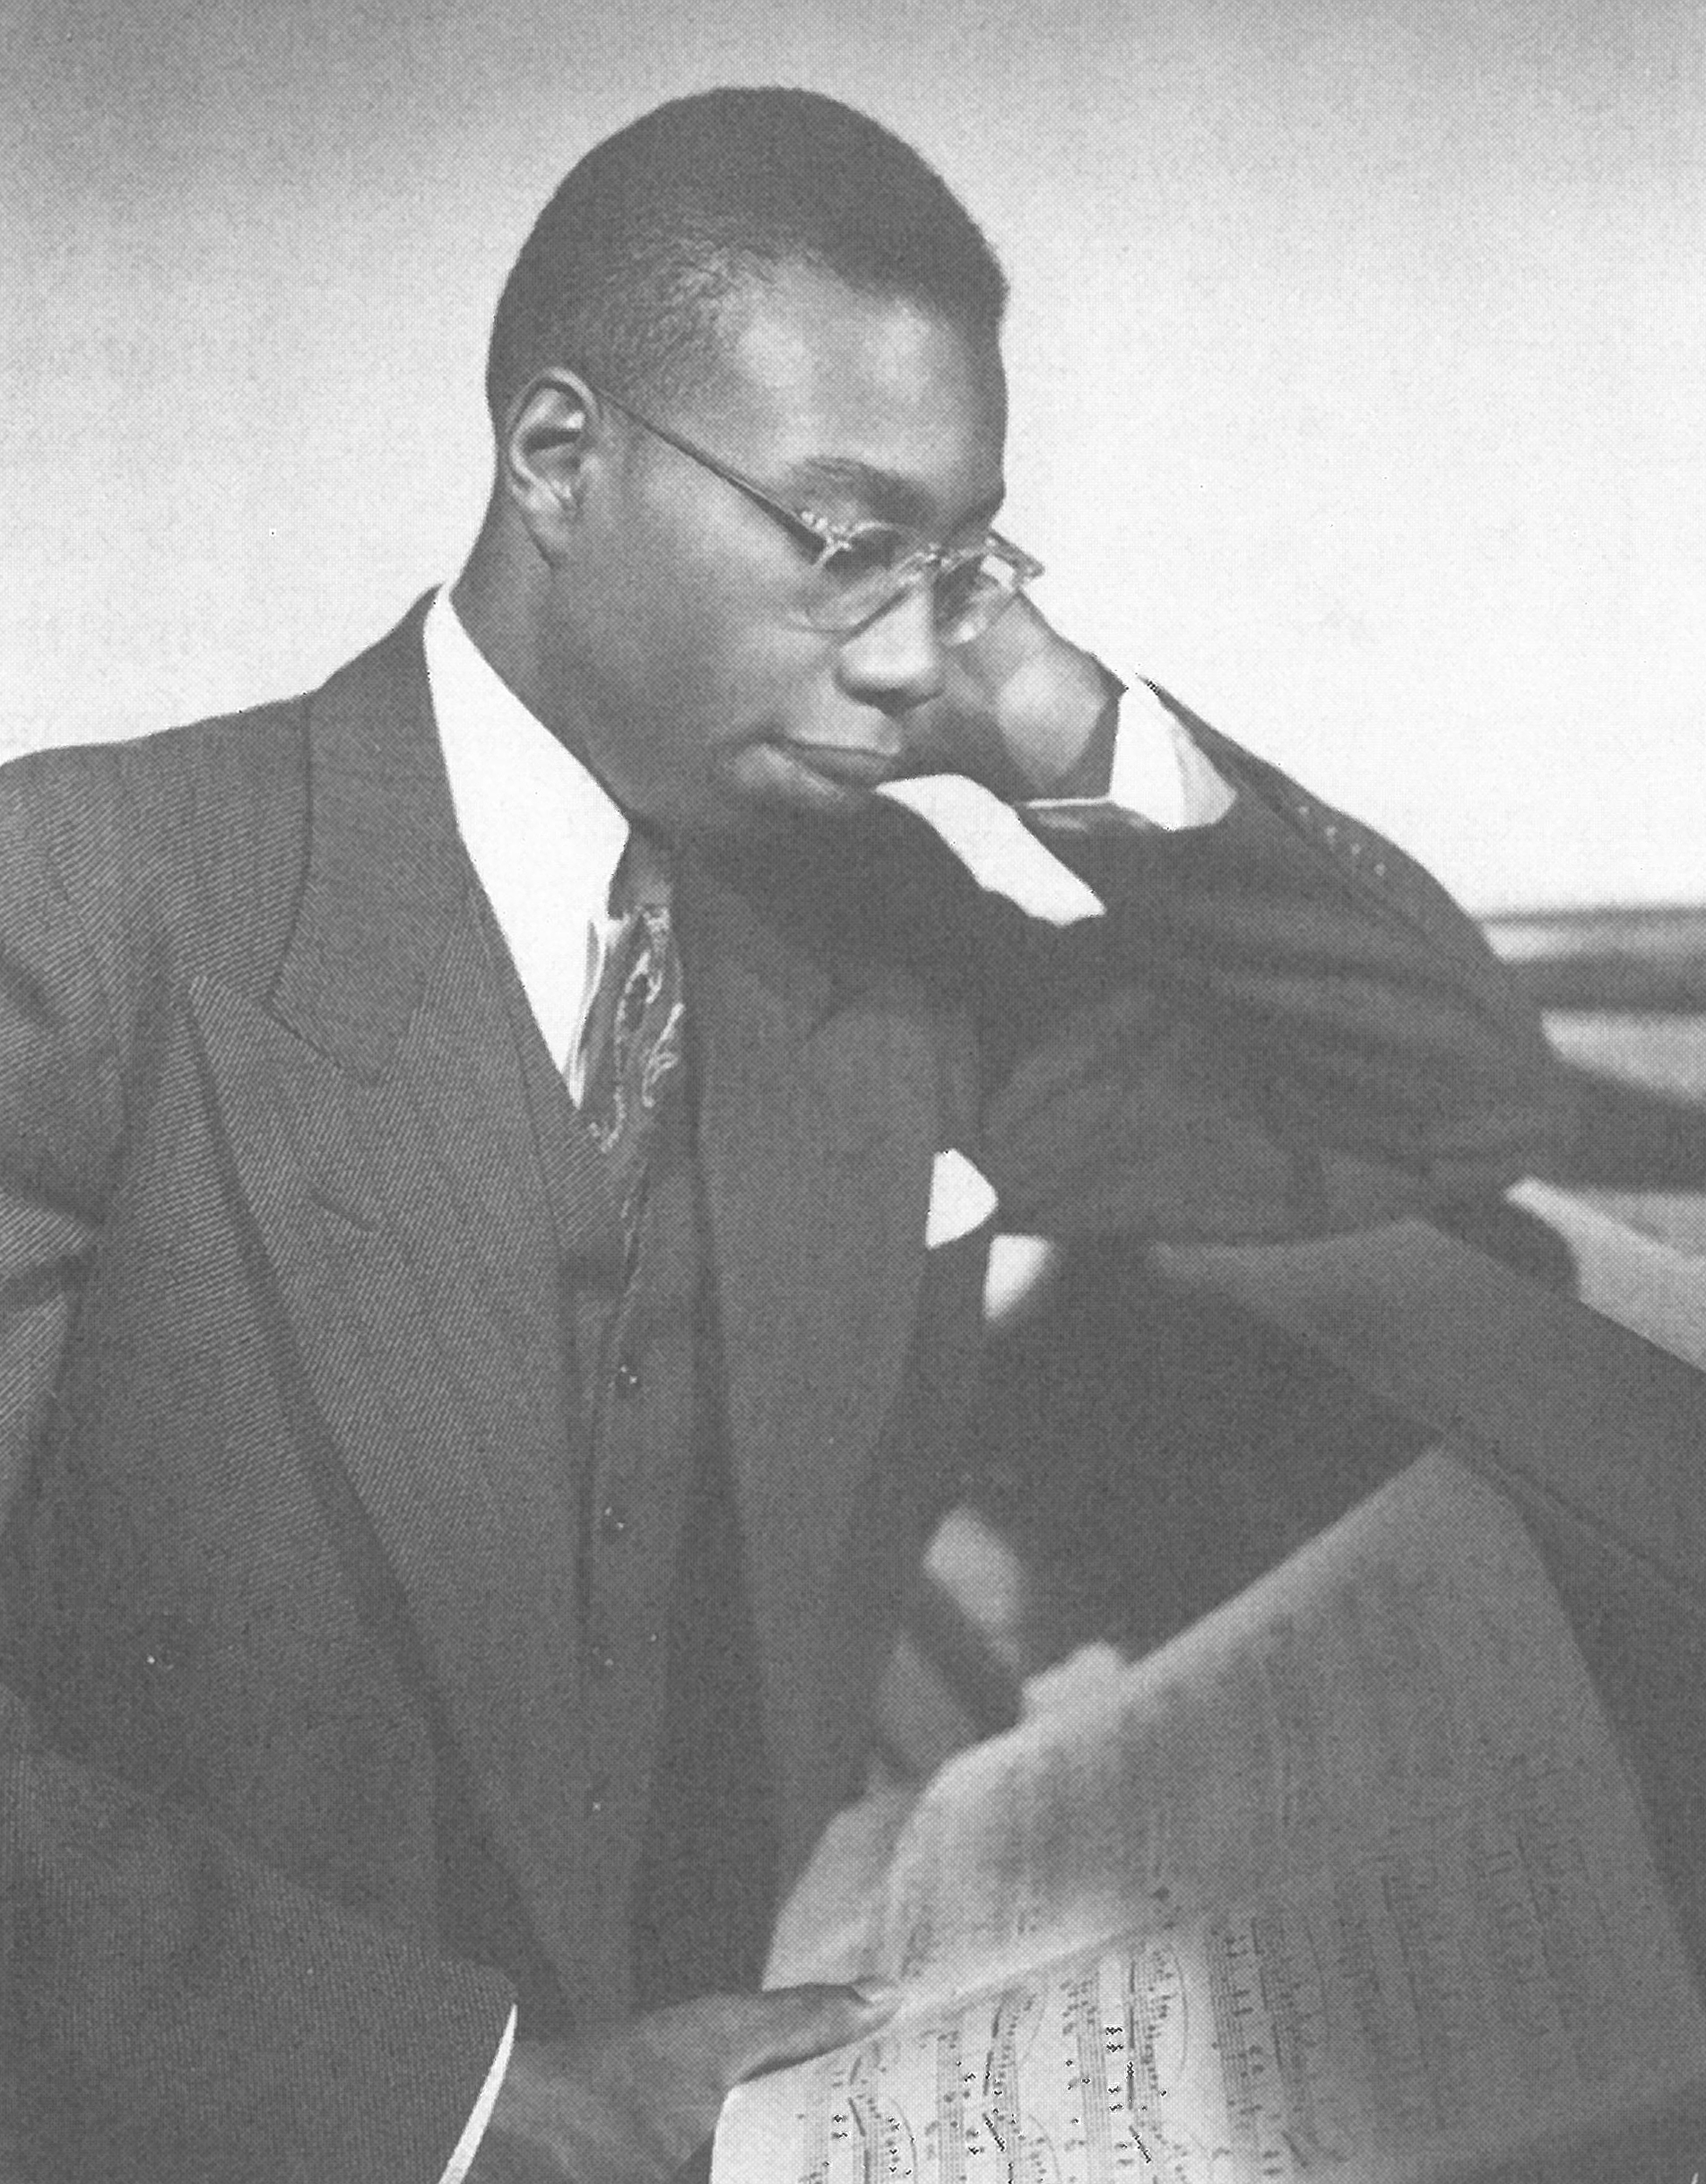 George Walker at a piano pensively studying a score in 1941.